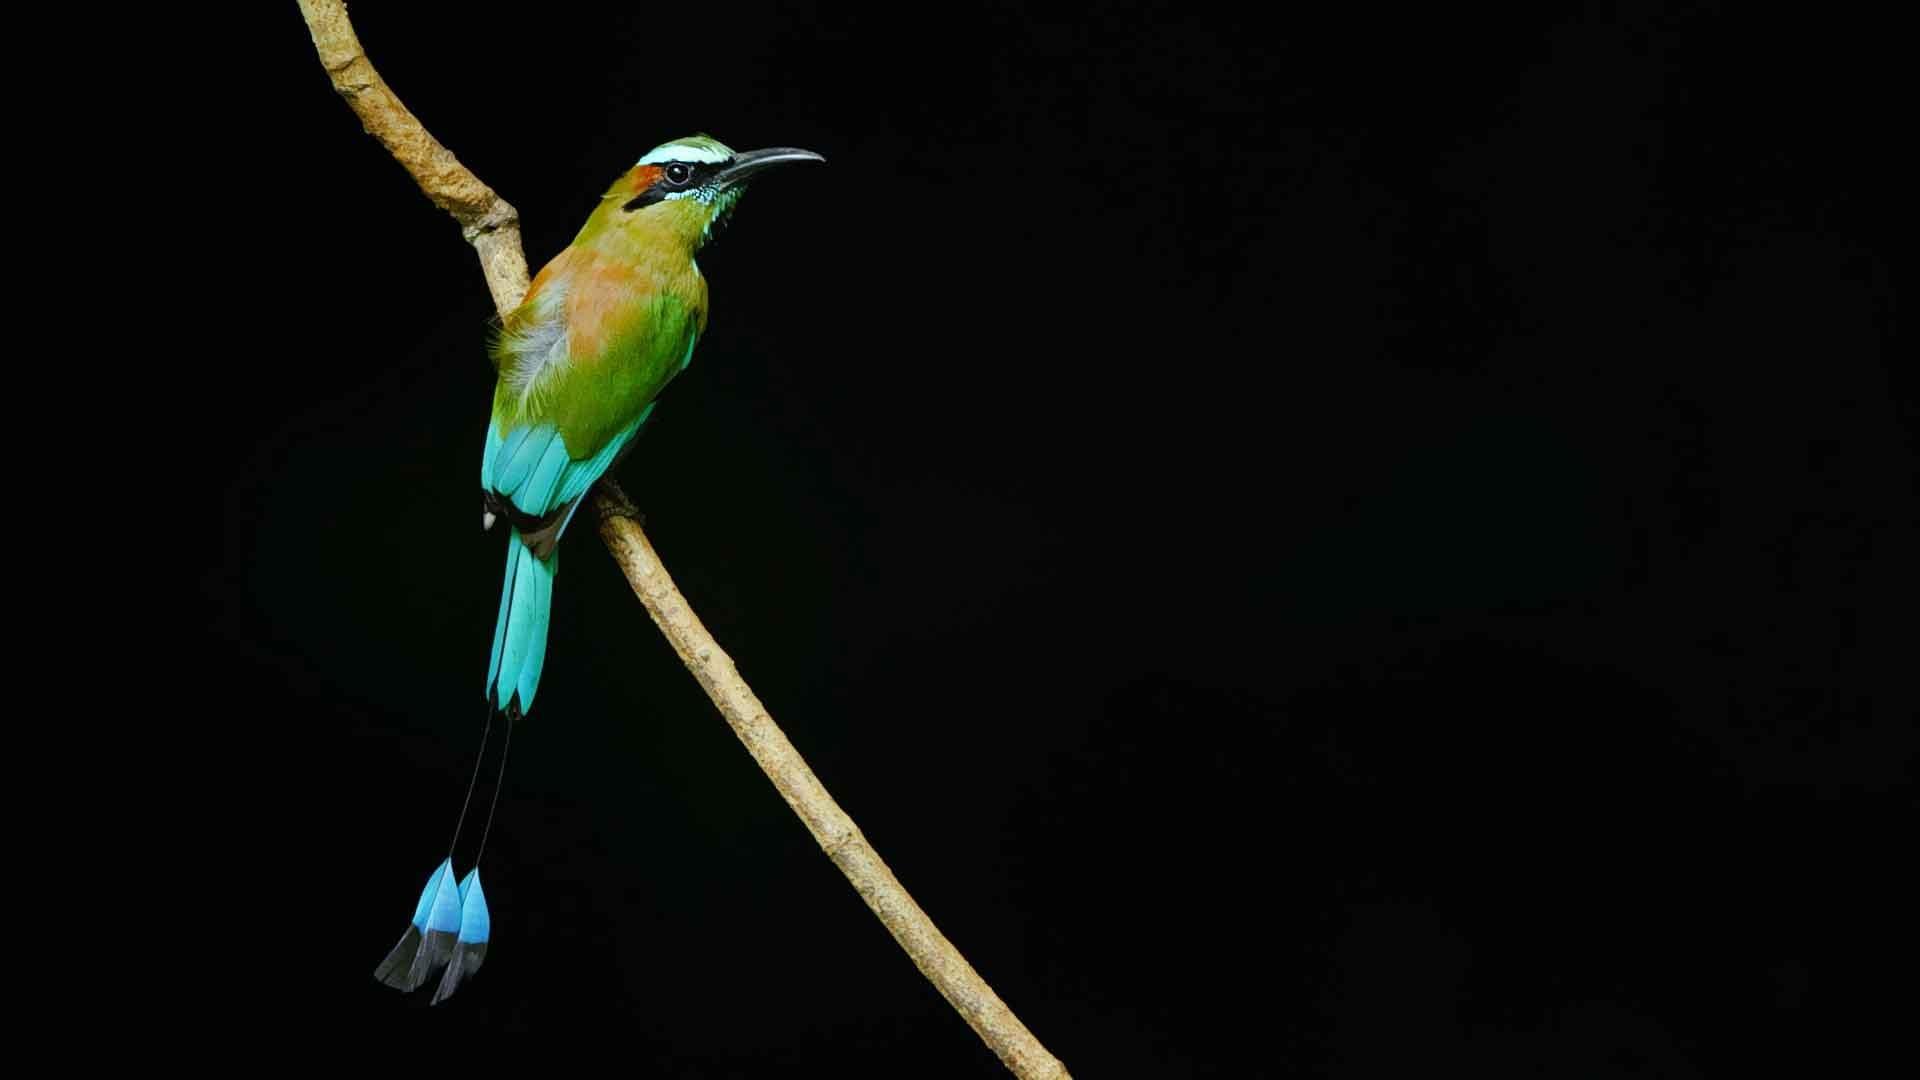 A turquoise browed motmot